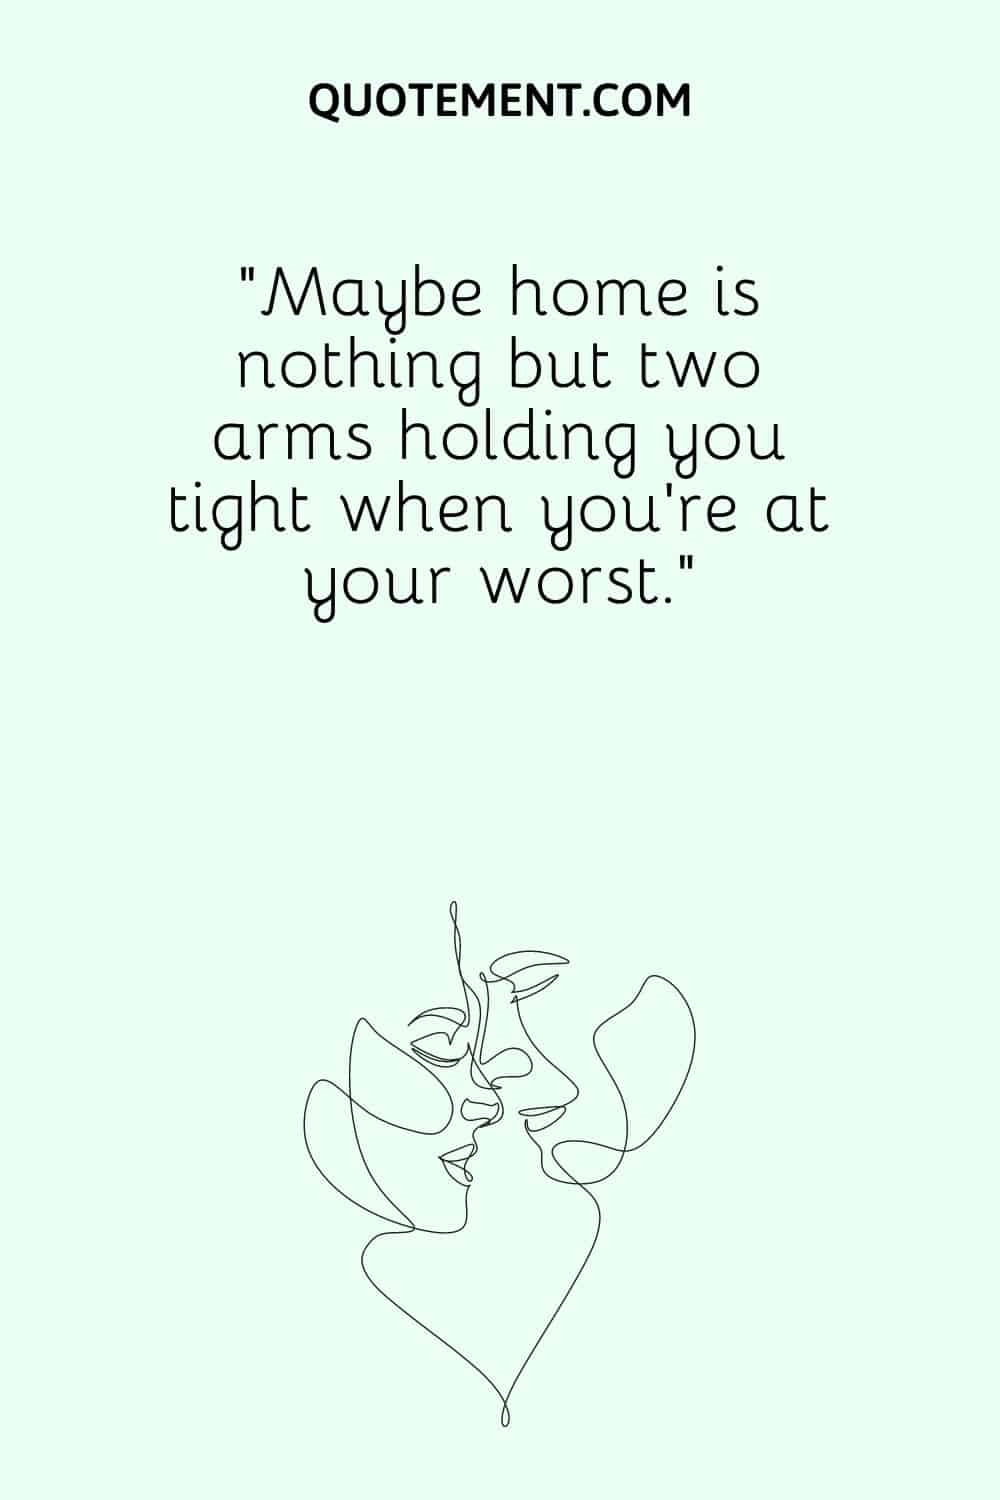 “Maybe home is nothing but two arms holding you tight when you’re at your worst.”